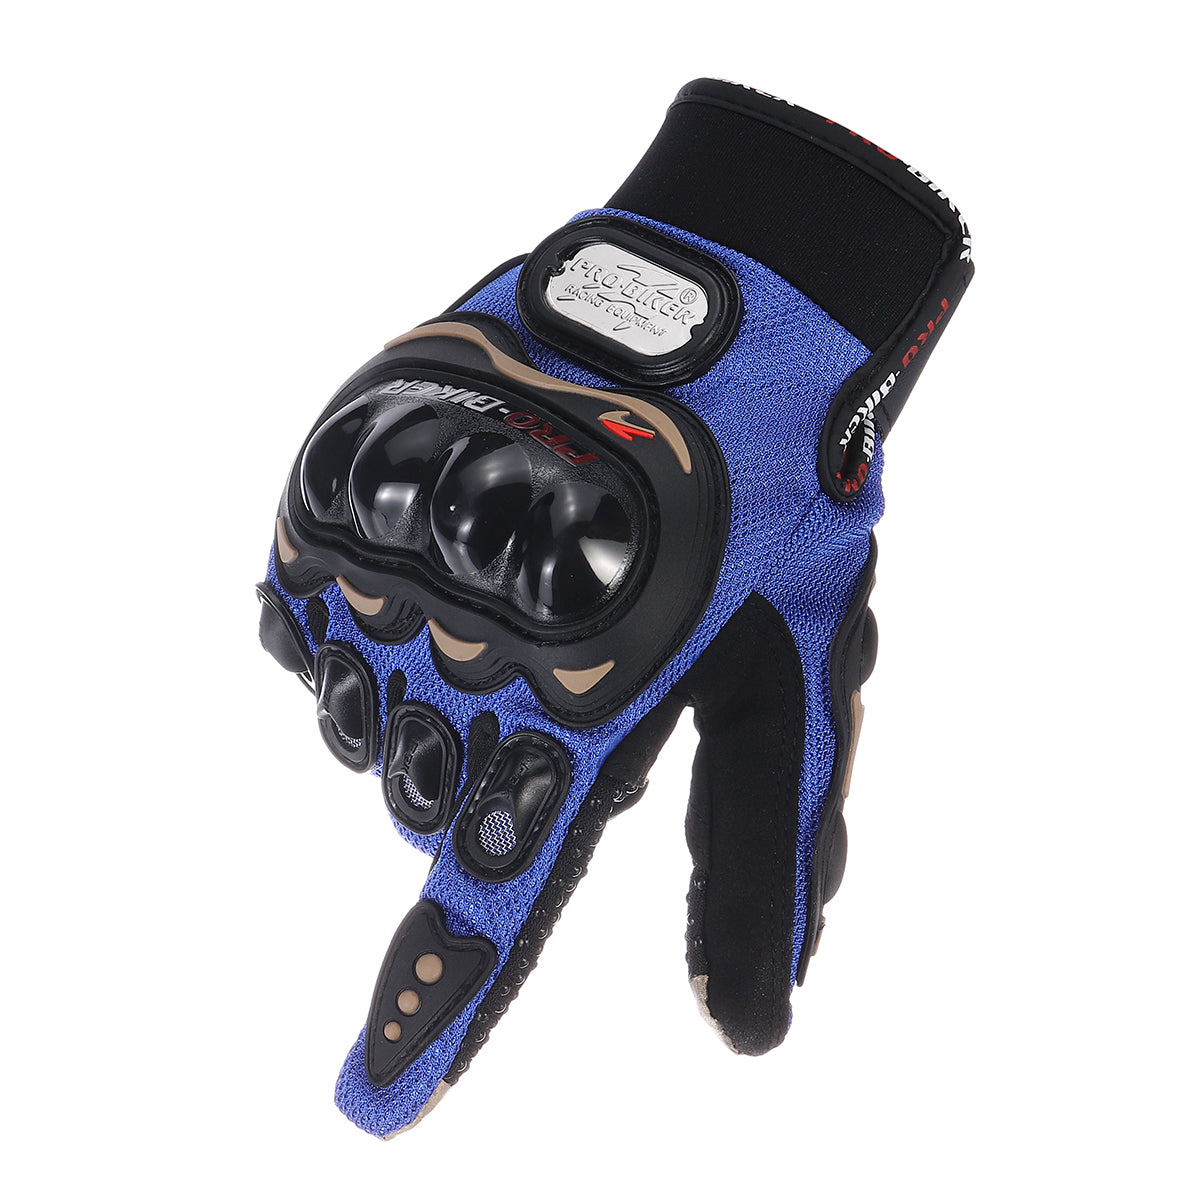 Dark Slate Blue Off-road Riding Full Finger Gloves Touch Screen Motorcycle MTB Bicycle Bike Sport Warm Blue